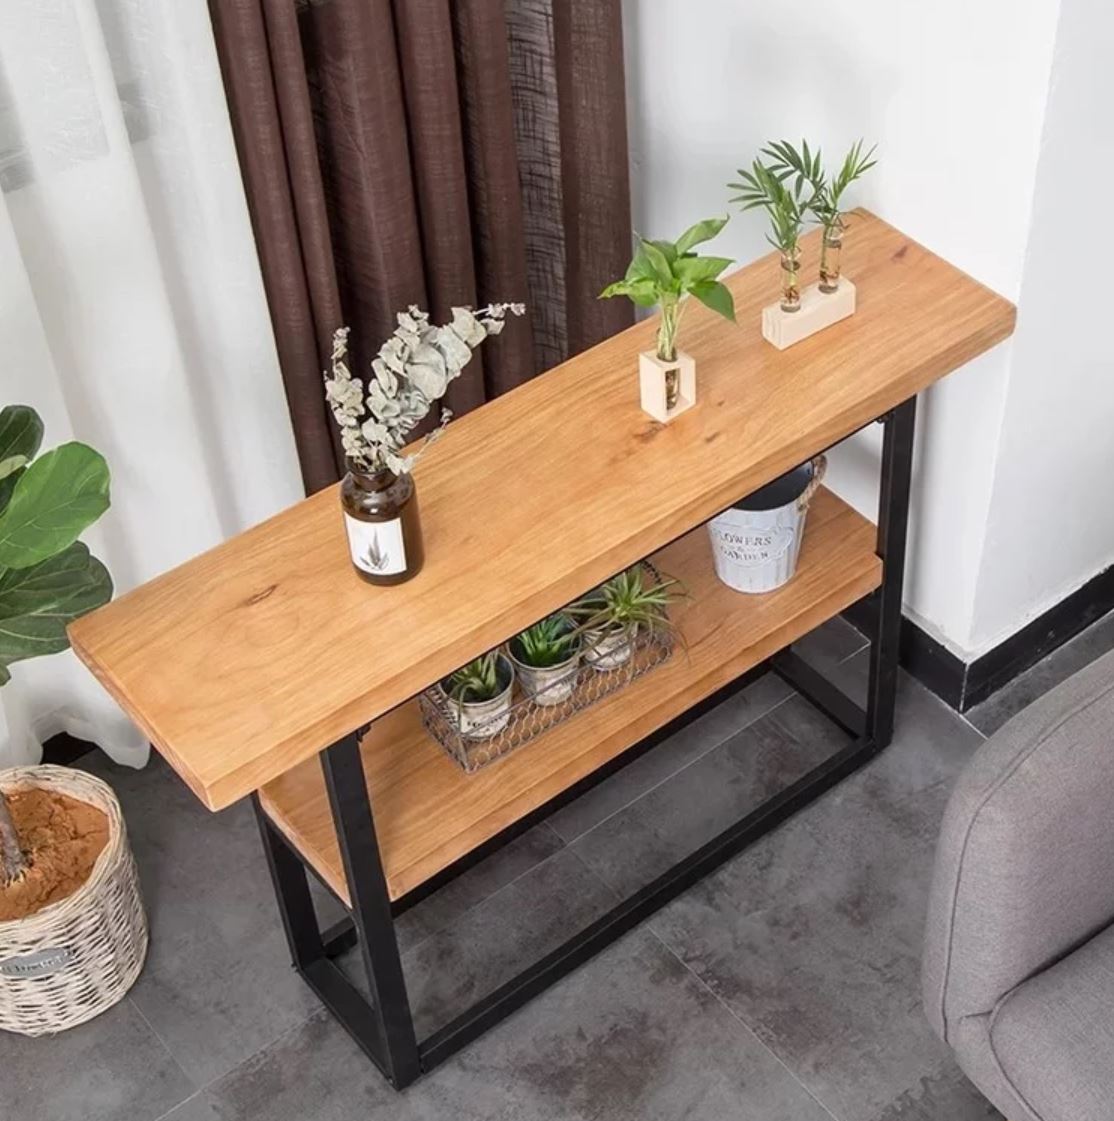 ADALINE Solid Wood Rustic Wooden Display Console Table